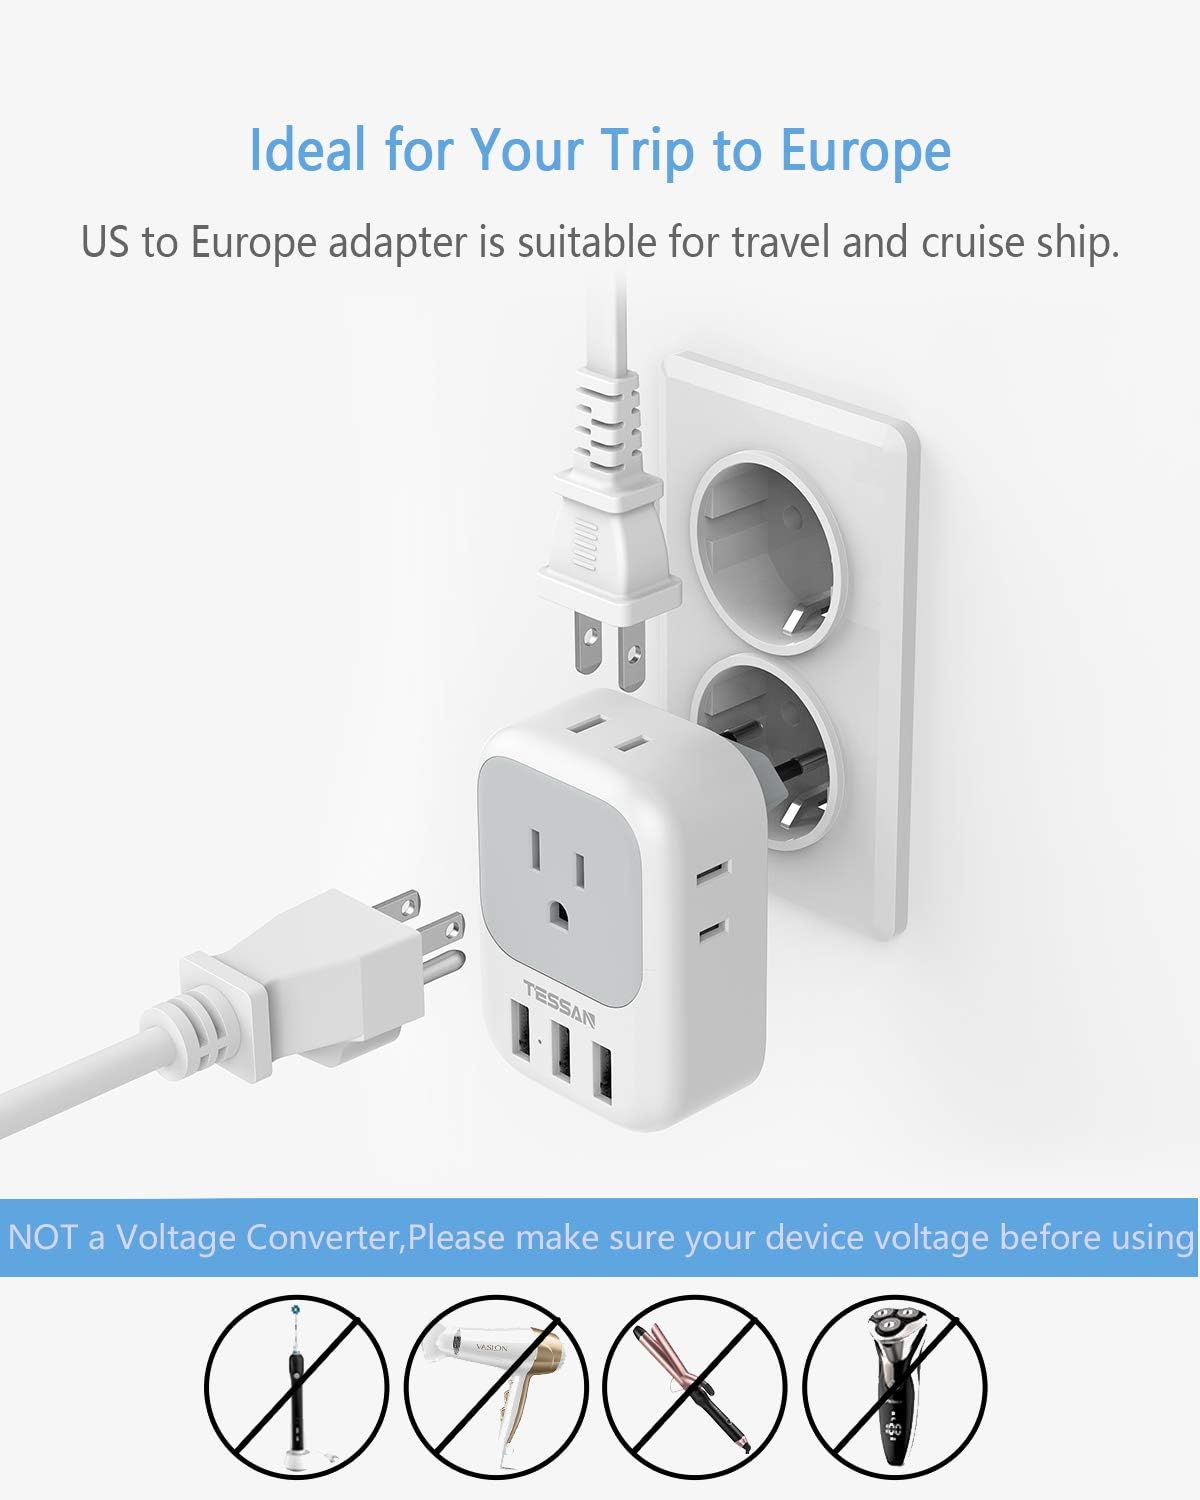 US to Europe adapter is suitable for travel and cruise ship